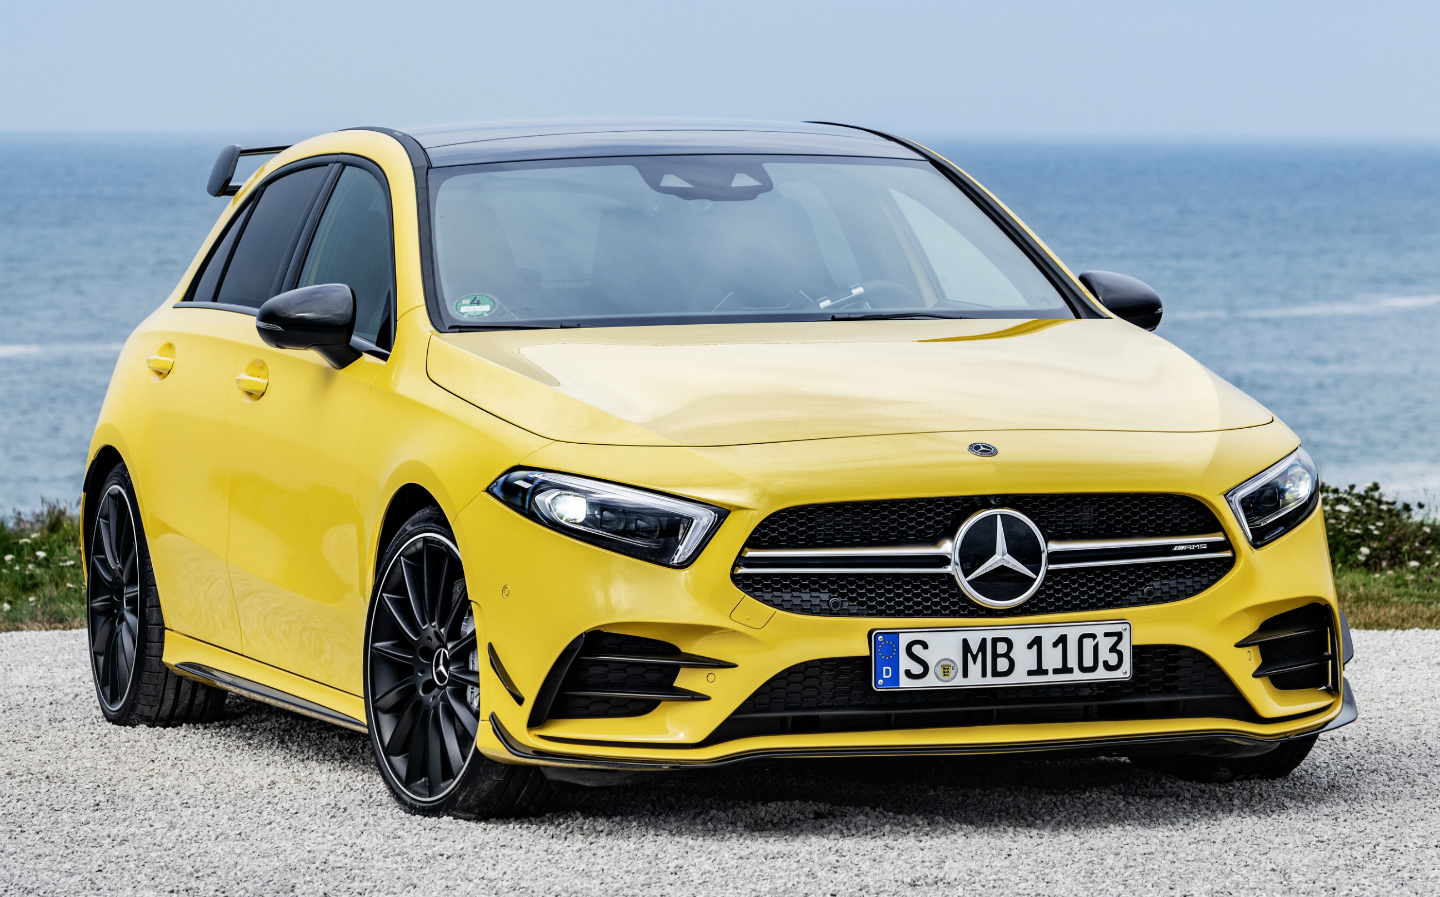 Sunday Times Motor Awards 2019 Best Hot Hatch of the Year. Mercedes-AMG A 35